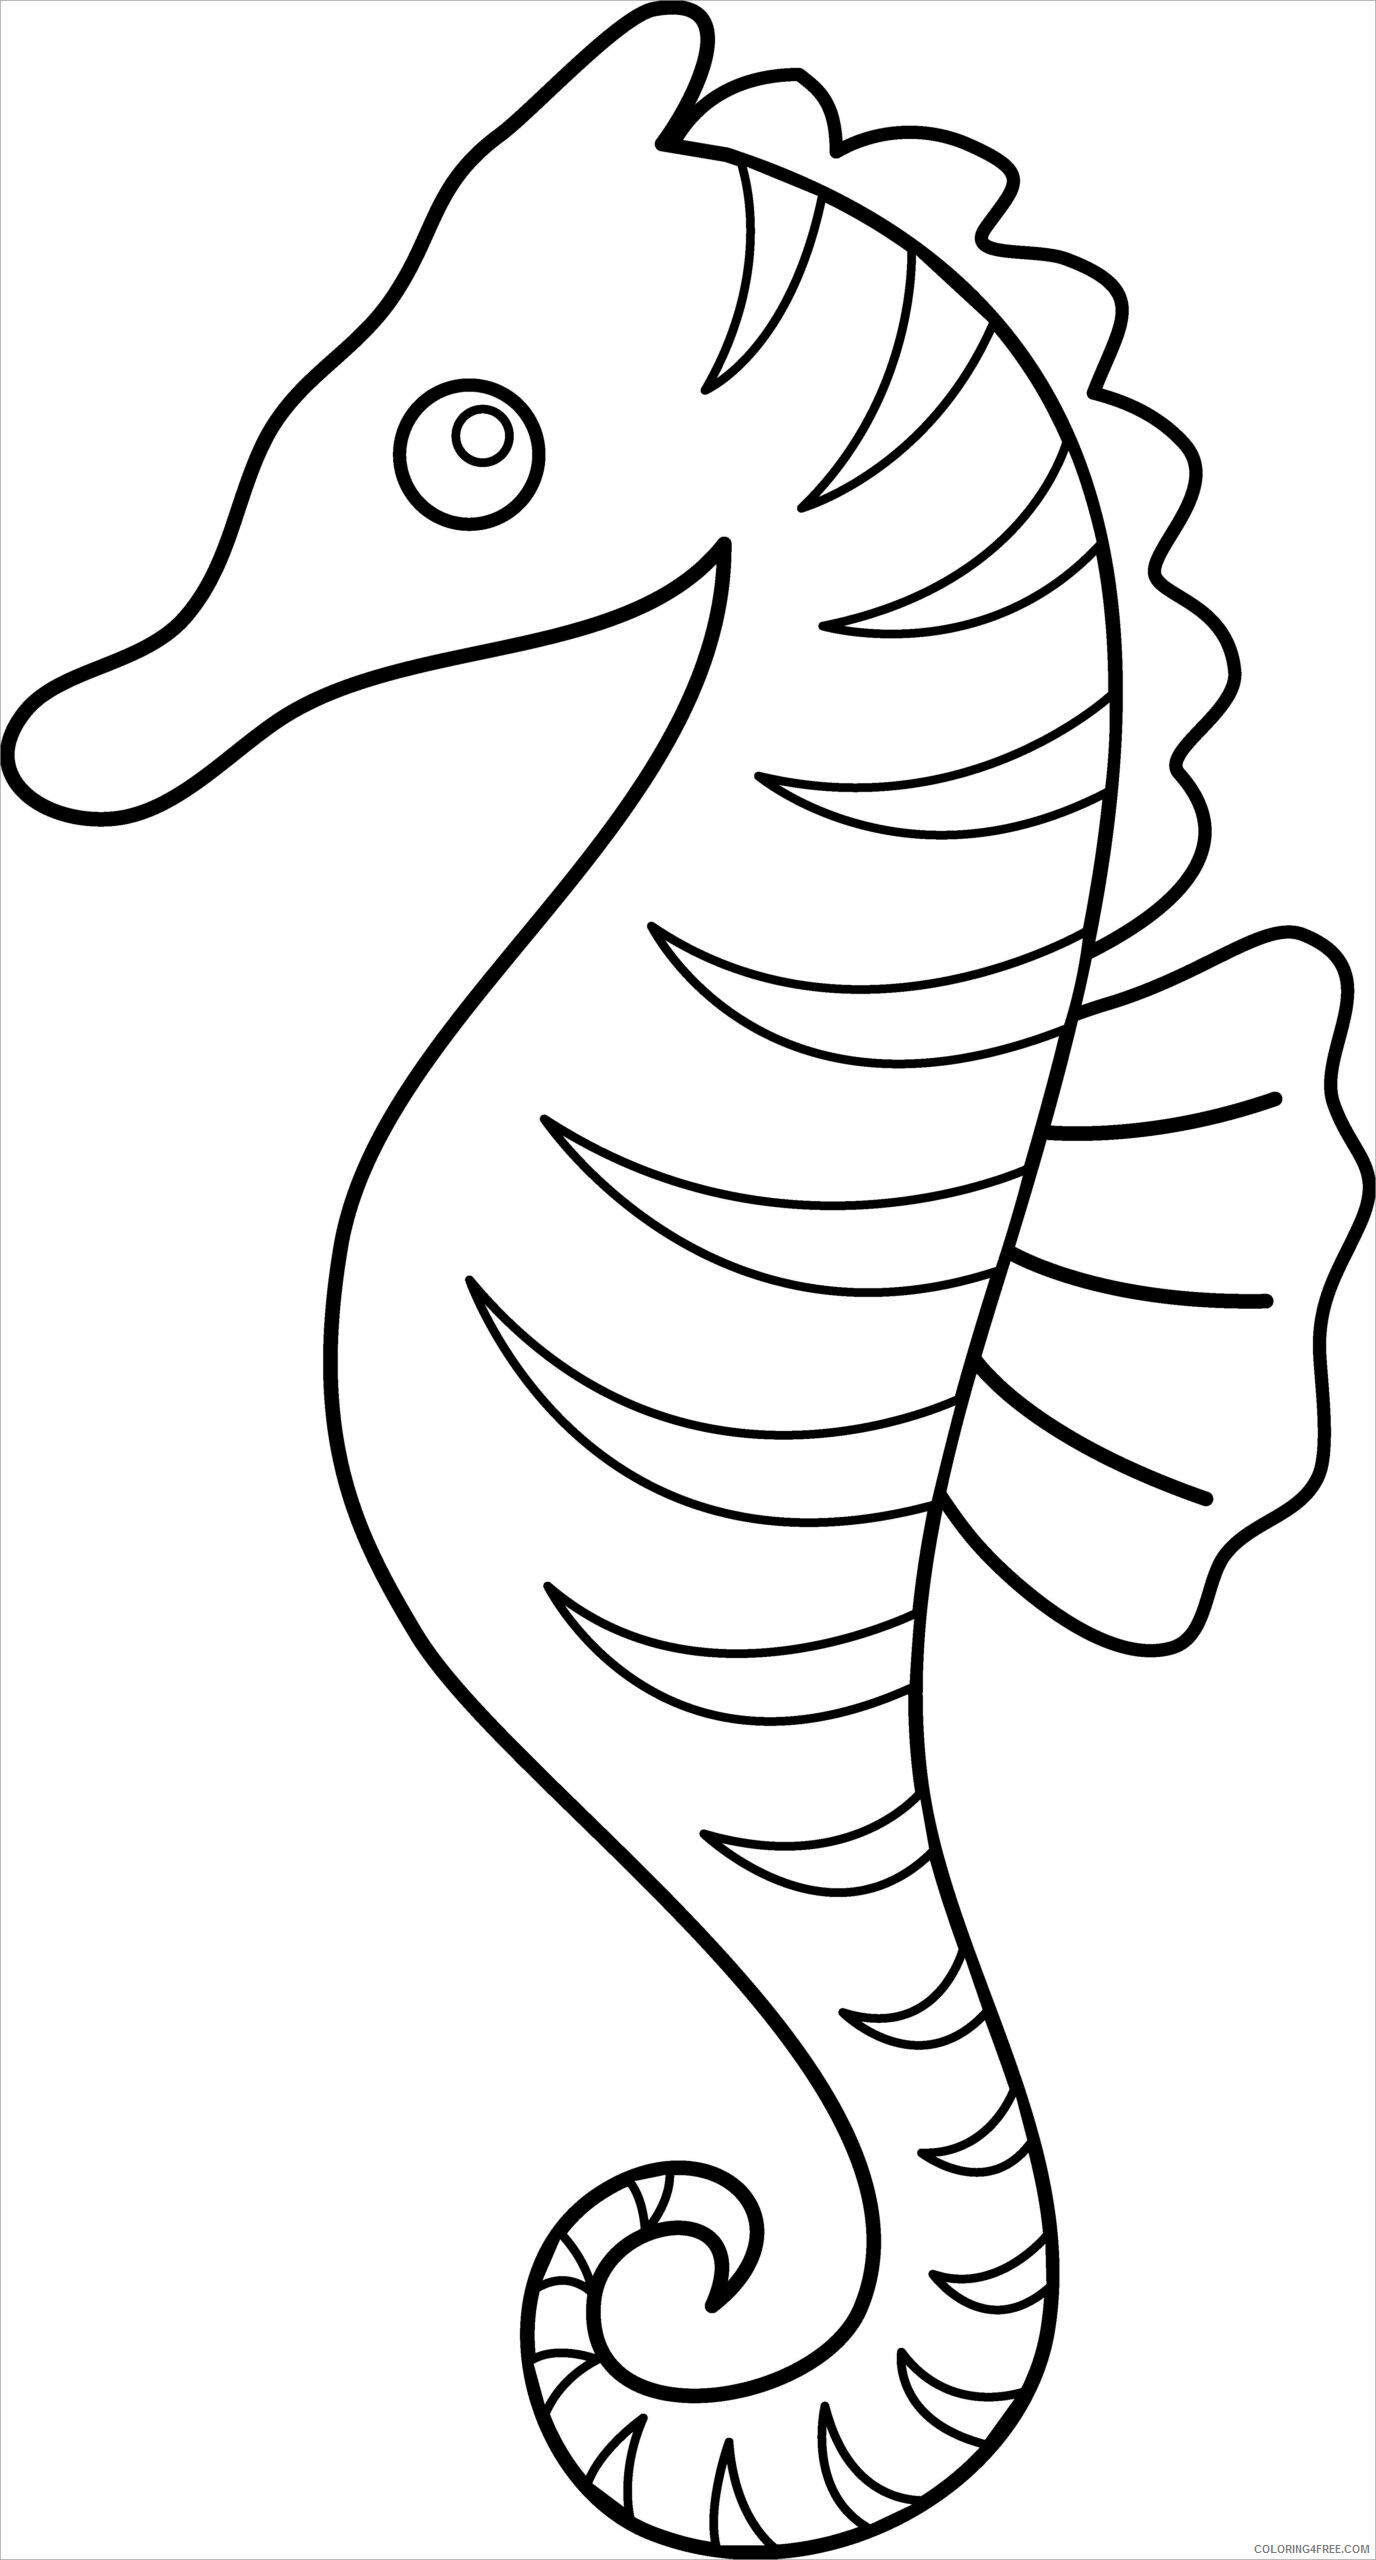 Seahorse Coloring Pages Animal Printable Sheets cute baby seahorse 2021 4381 Coloring4free